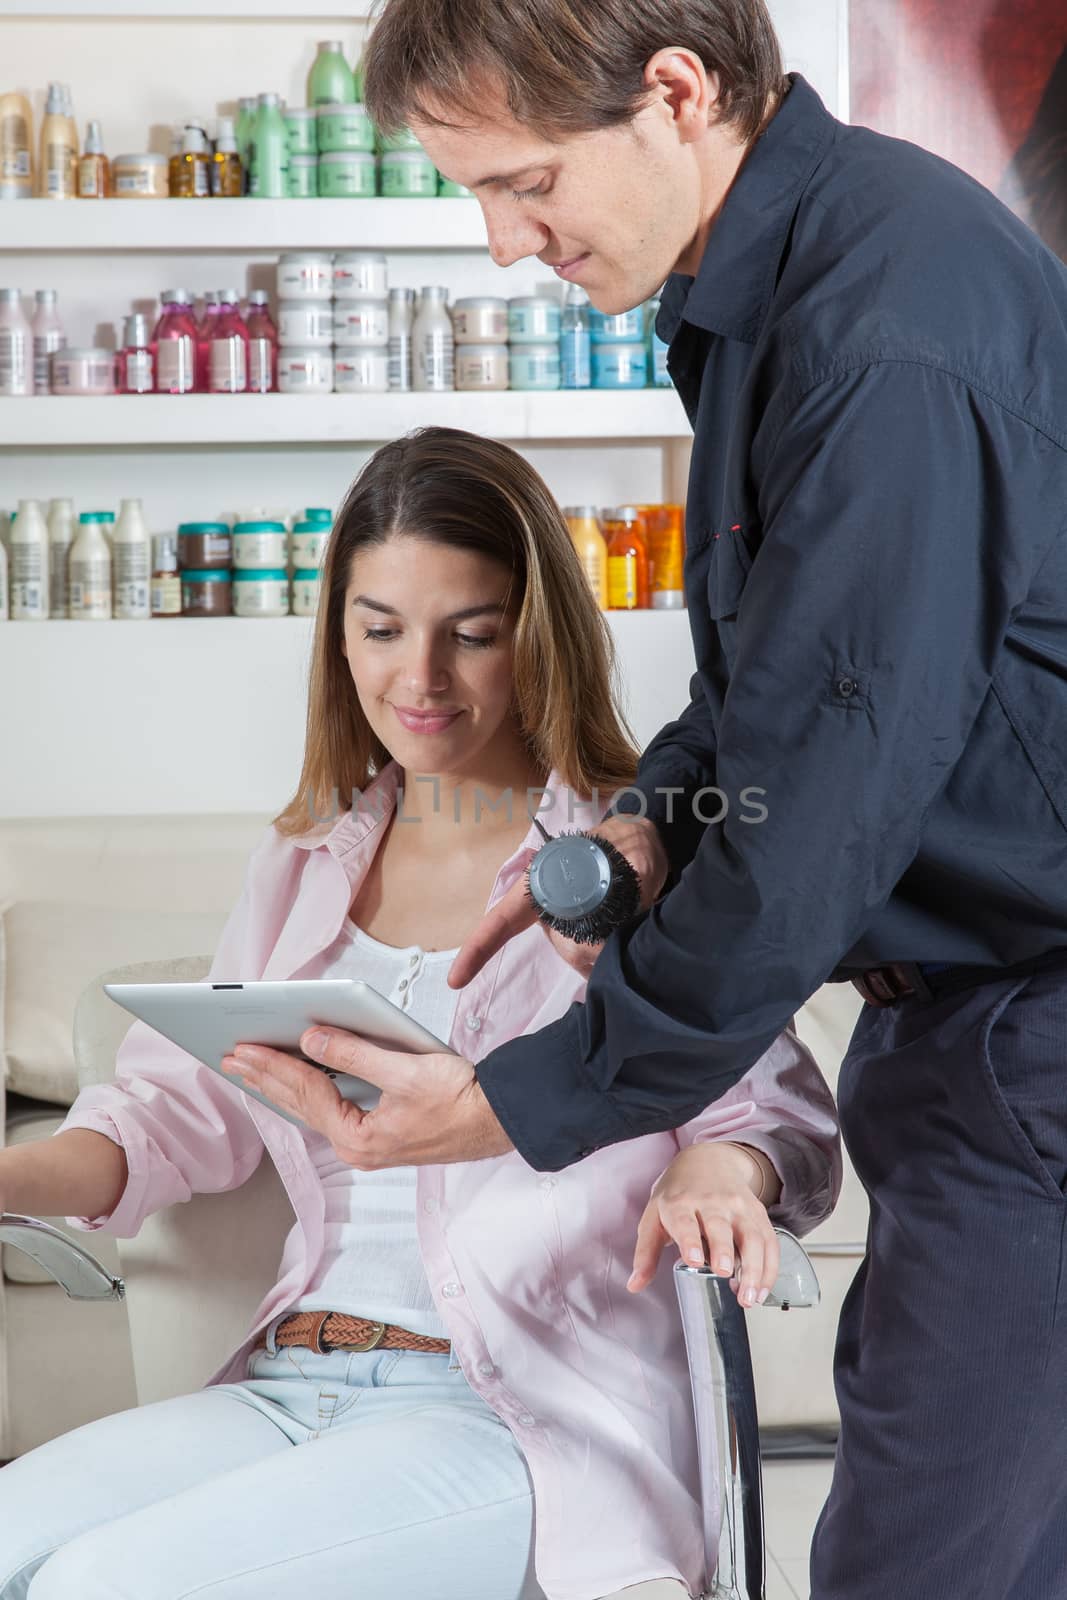 The hairstylist showing to one woman the ipad